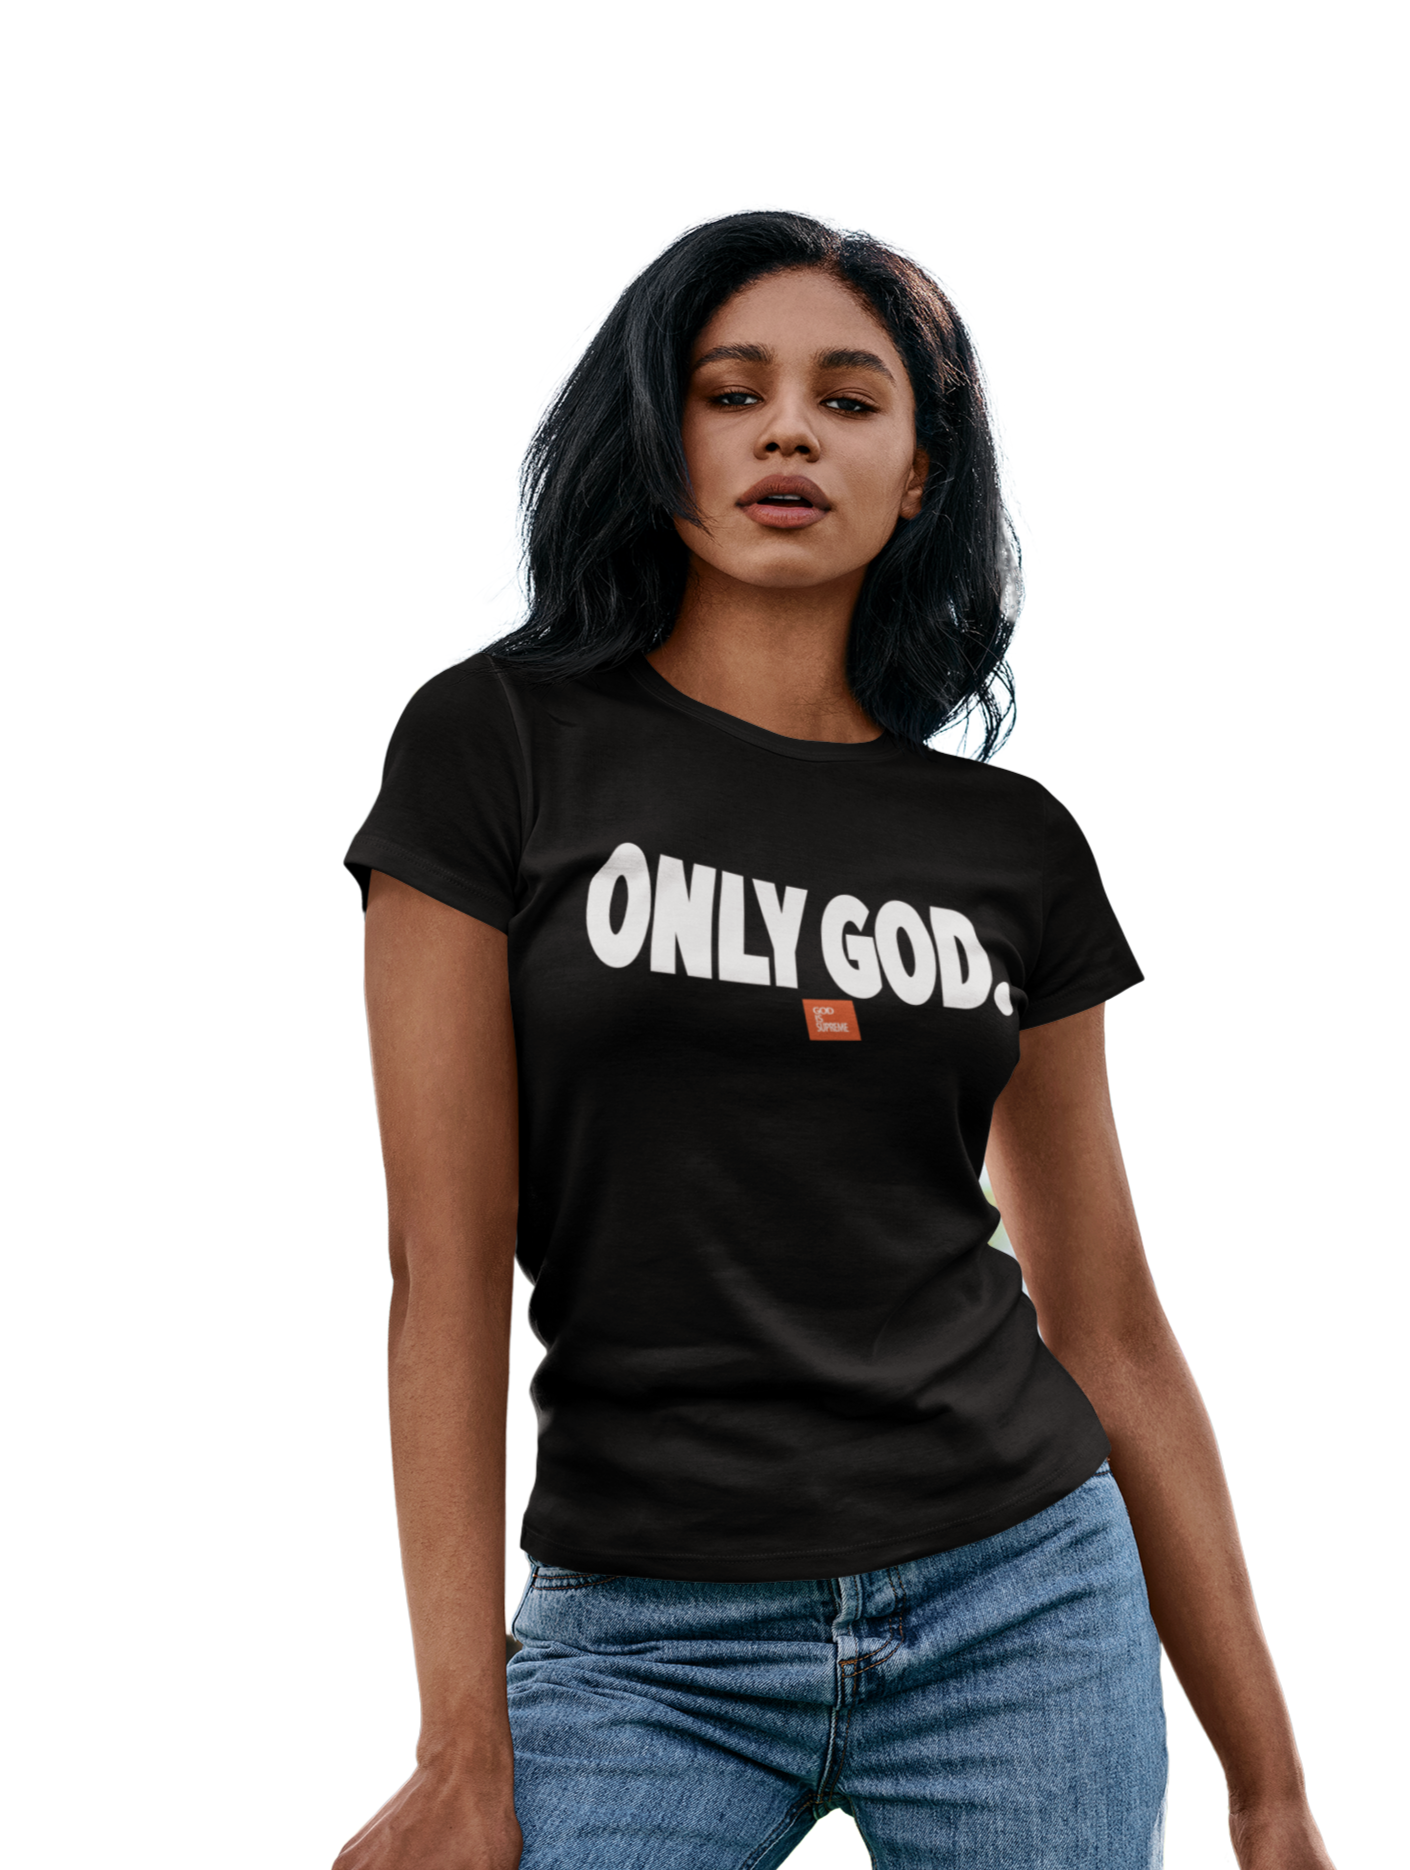 Only God with Box/ Black T-shirt